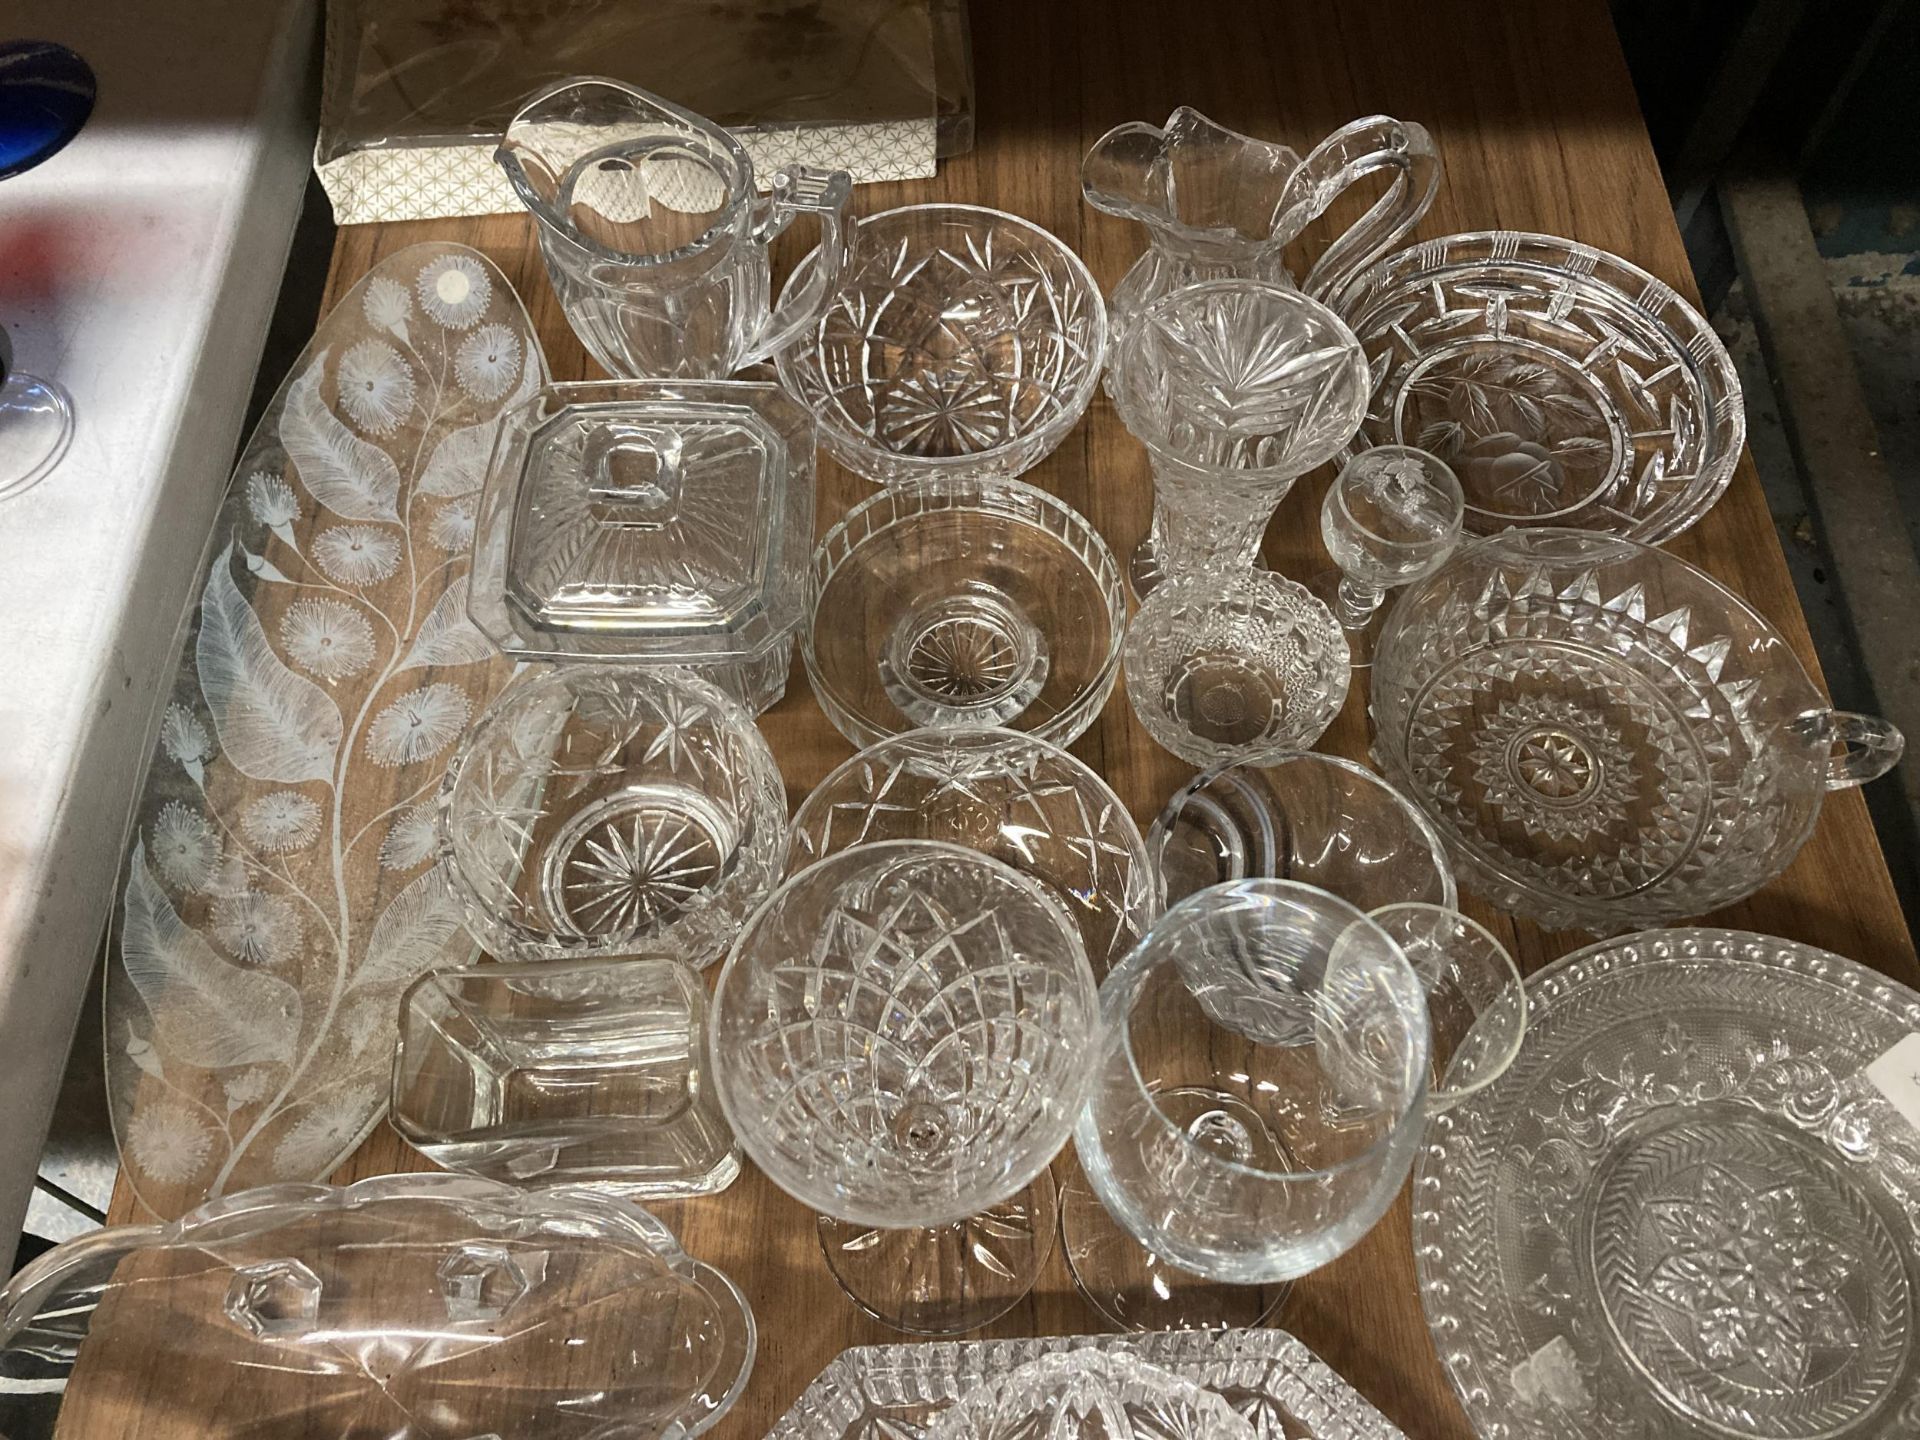 A LARGE QUANTITY OF GLASSWARE TO INCLUDE GLASSES, BOWLS, TRAYS, CANDLEHOLDERS, ETC., - Image 4 of 4